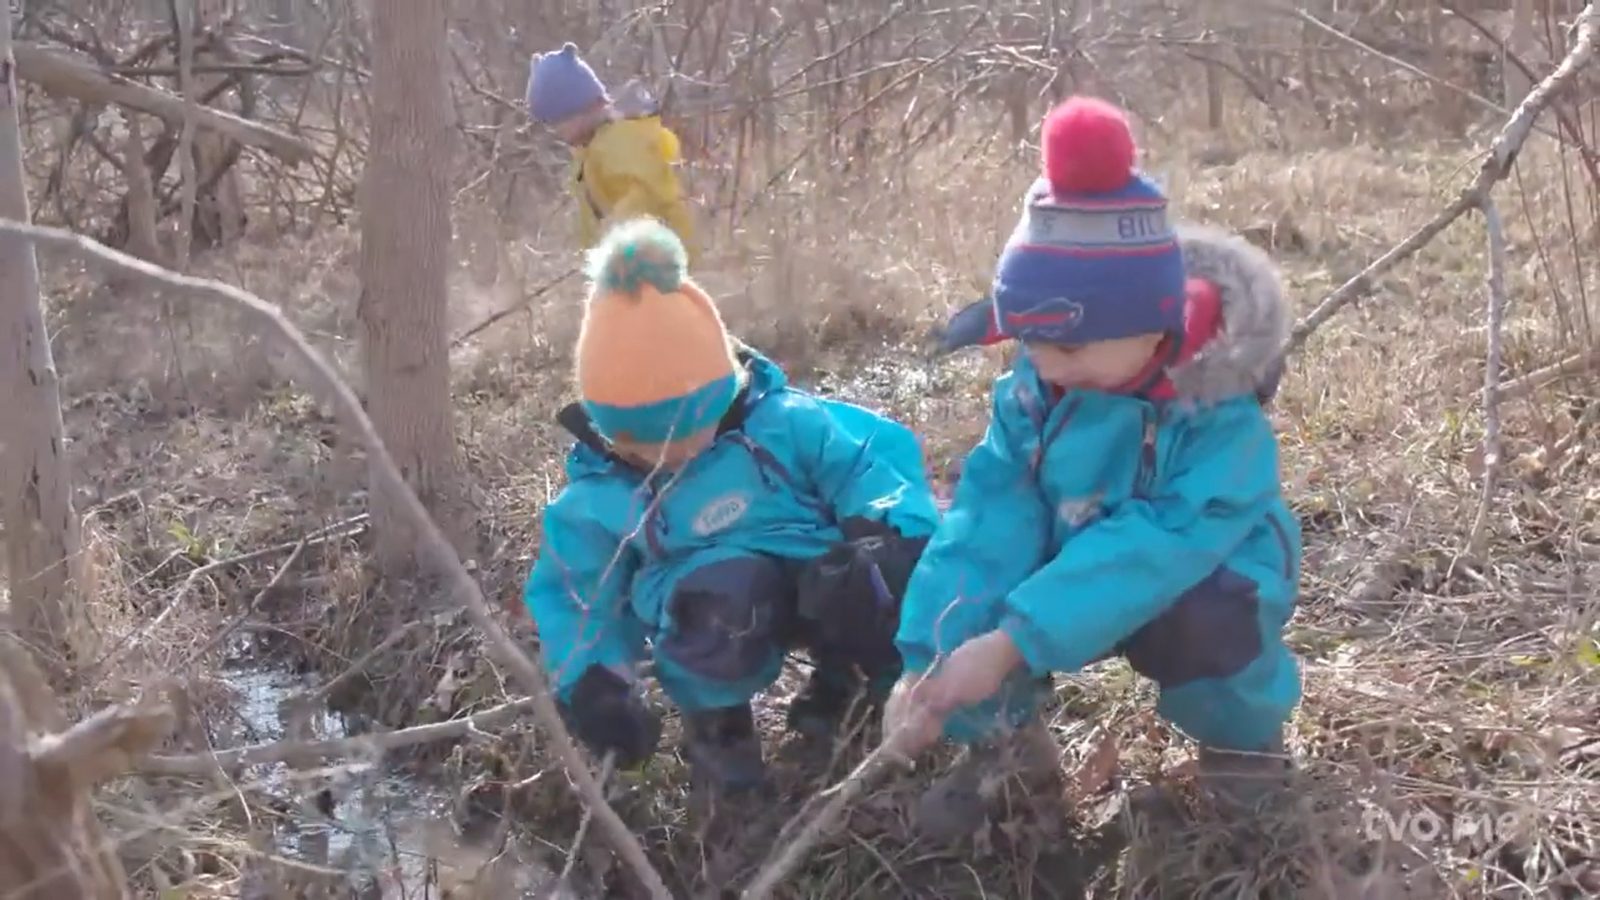 Two small children play with sticks in a forest while wearing winter gear.